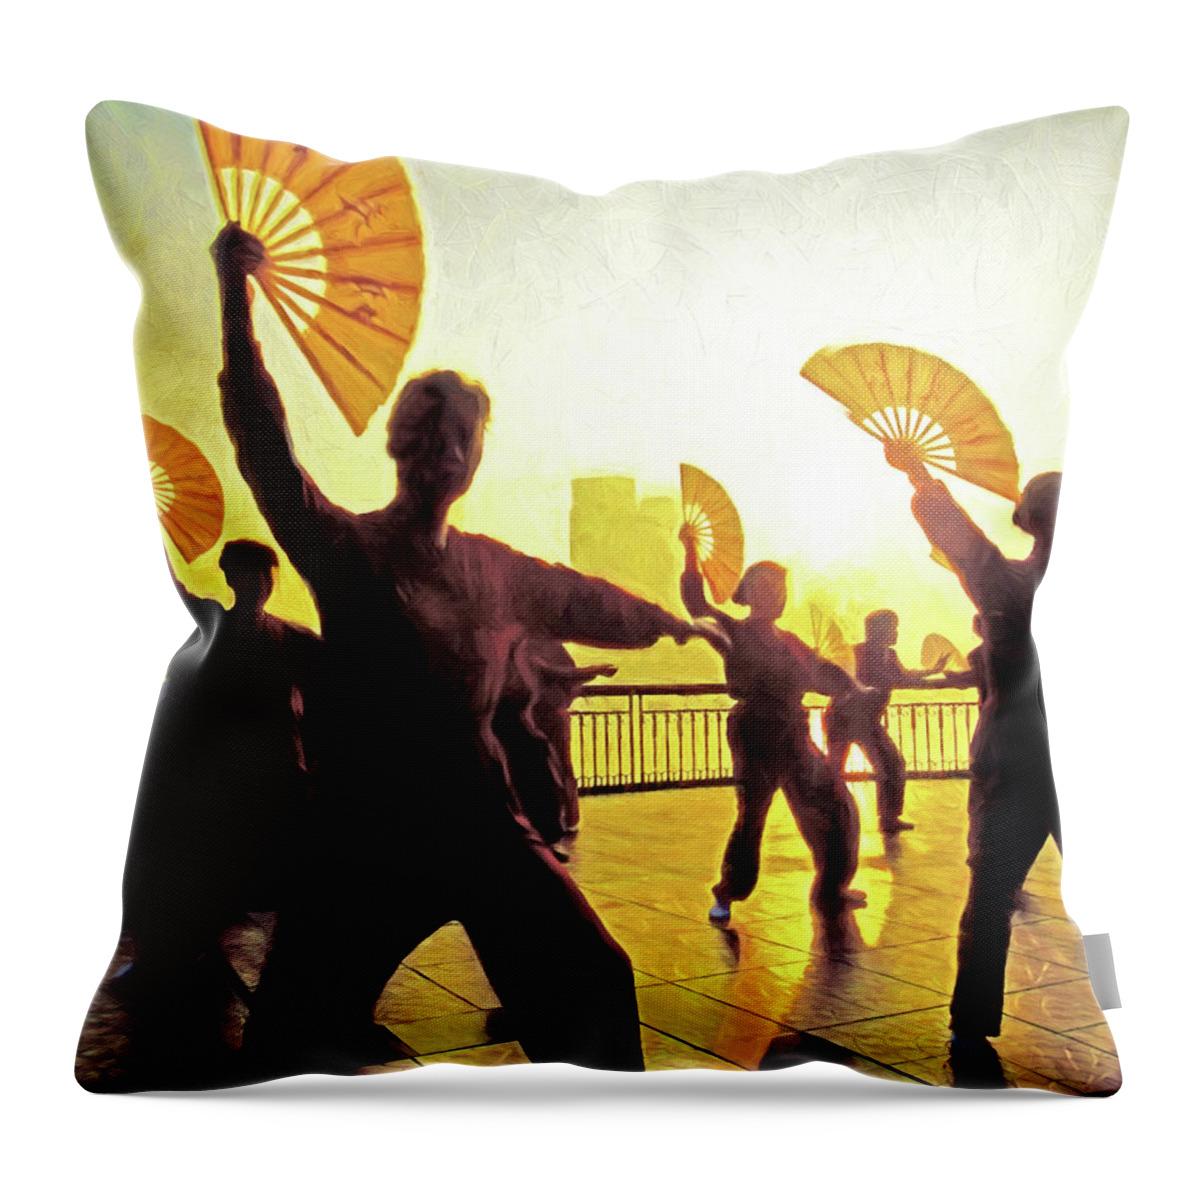 China Throw Pillow featuring the mixed media Shanghai Fan Exercise by Dennis Cox Photo Explorer